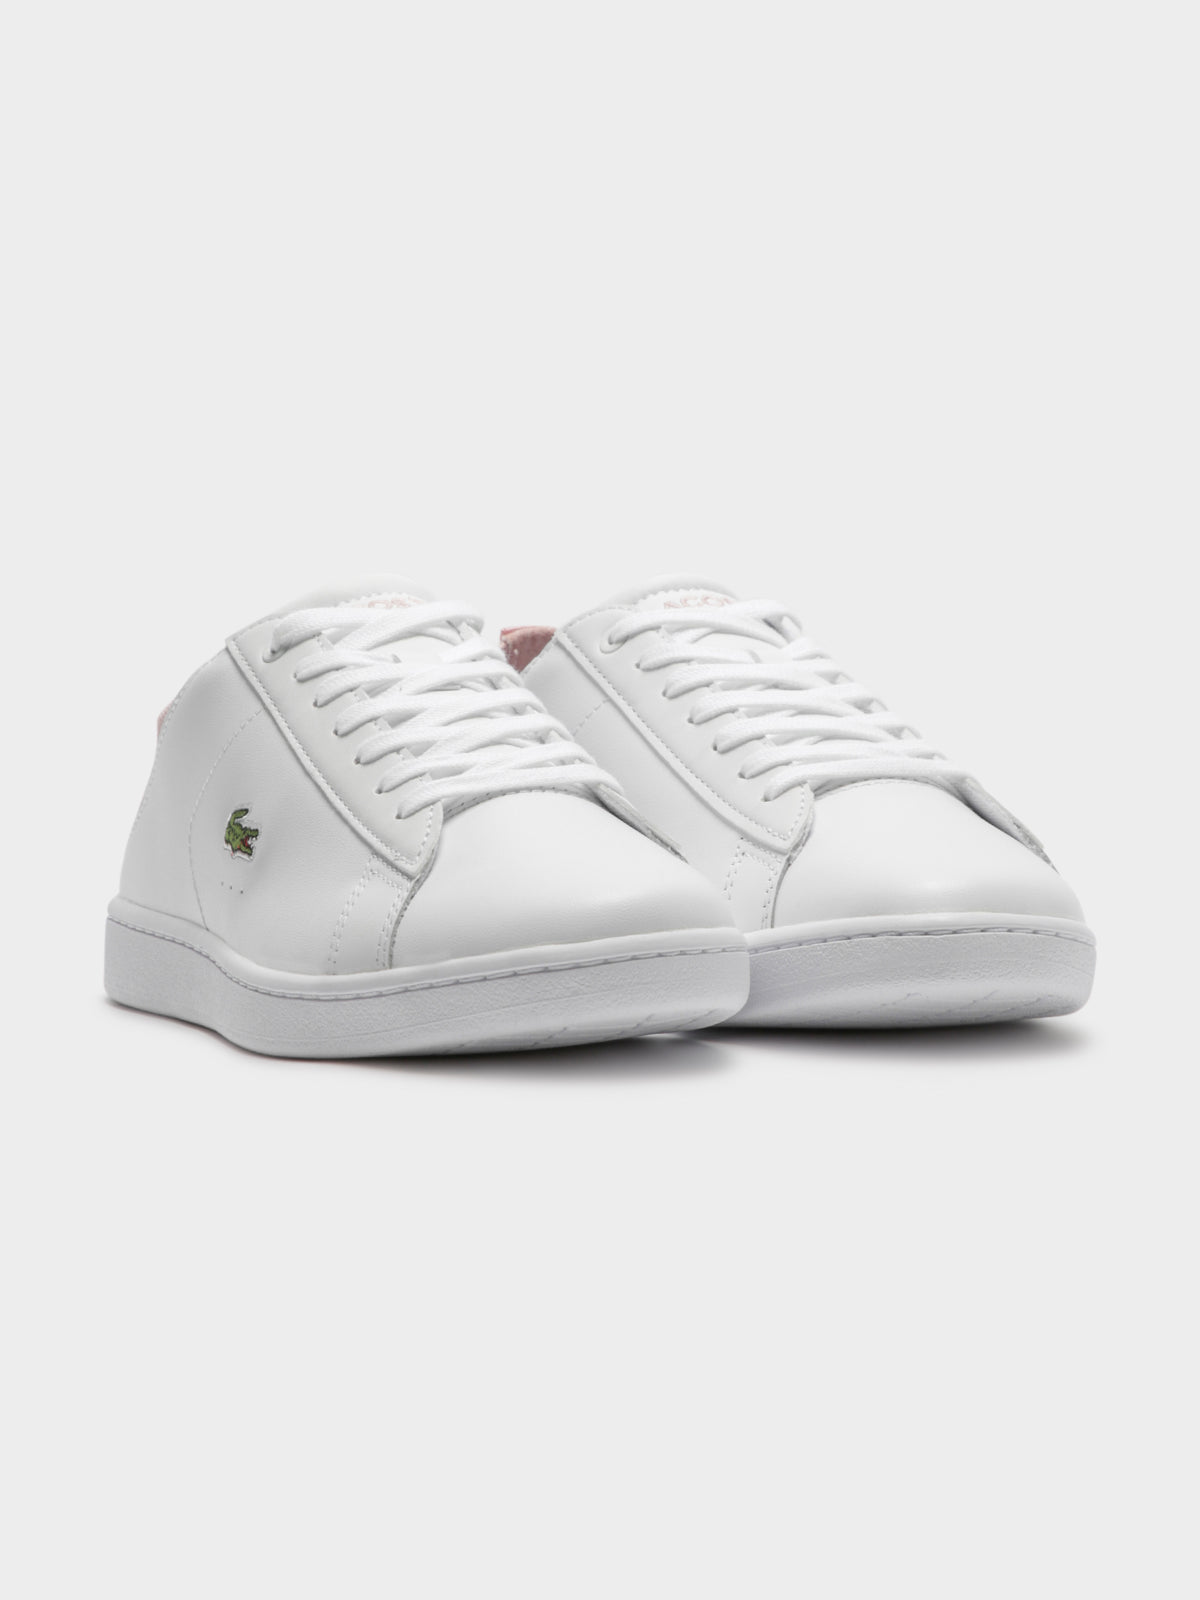 Carnaby Evo Duo 119 1 Sneakers in White &amp; Light Pink